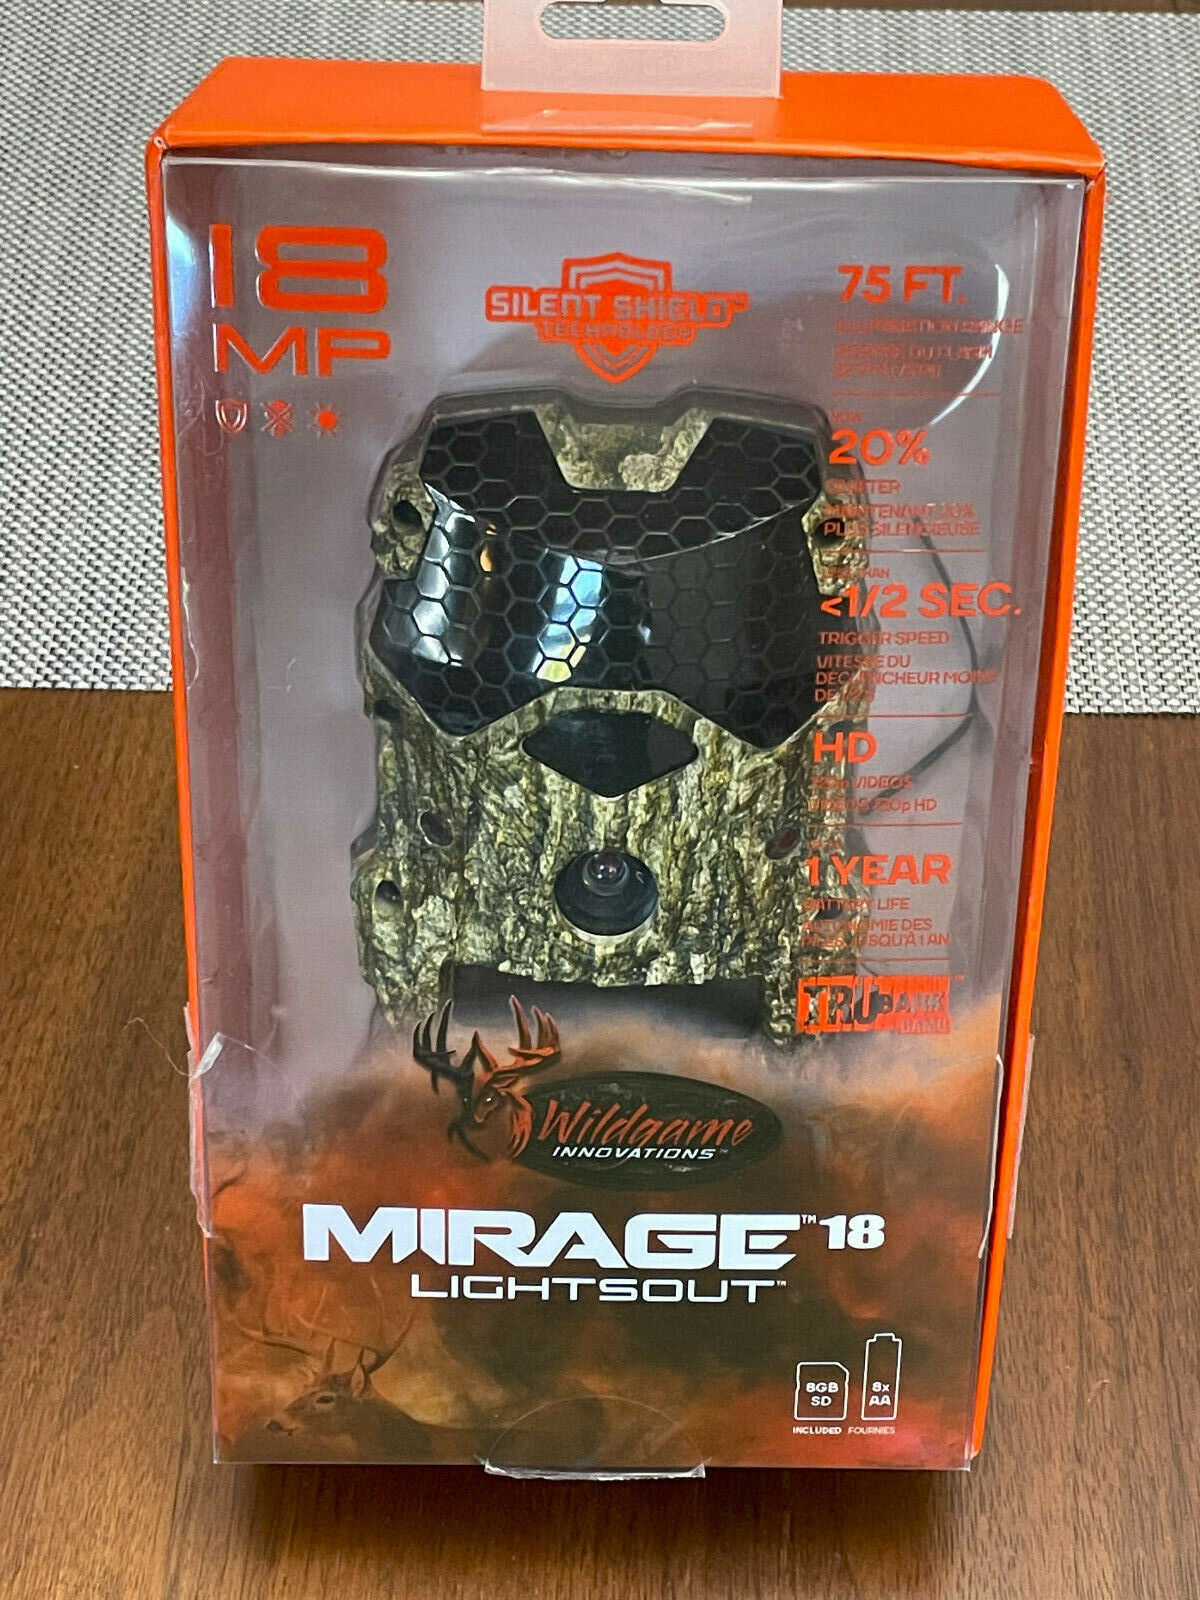 MIRAGE 18 LIGHTSOUT 18mp CAMERA #M18B38D2-8 by WILDGAME INOVATIONS. GENTLY USED